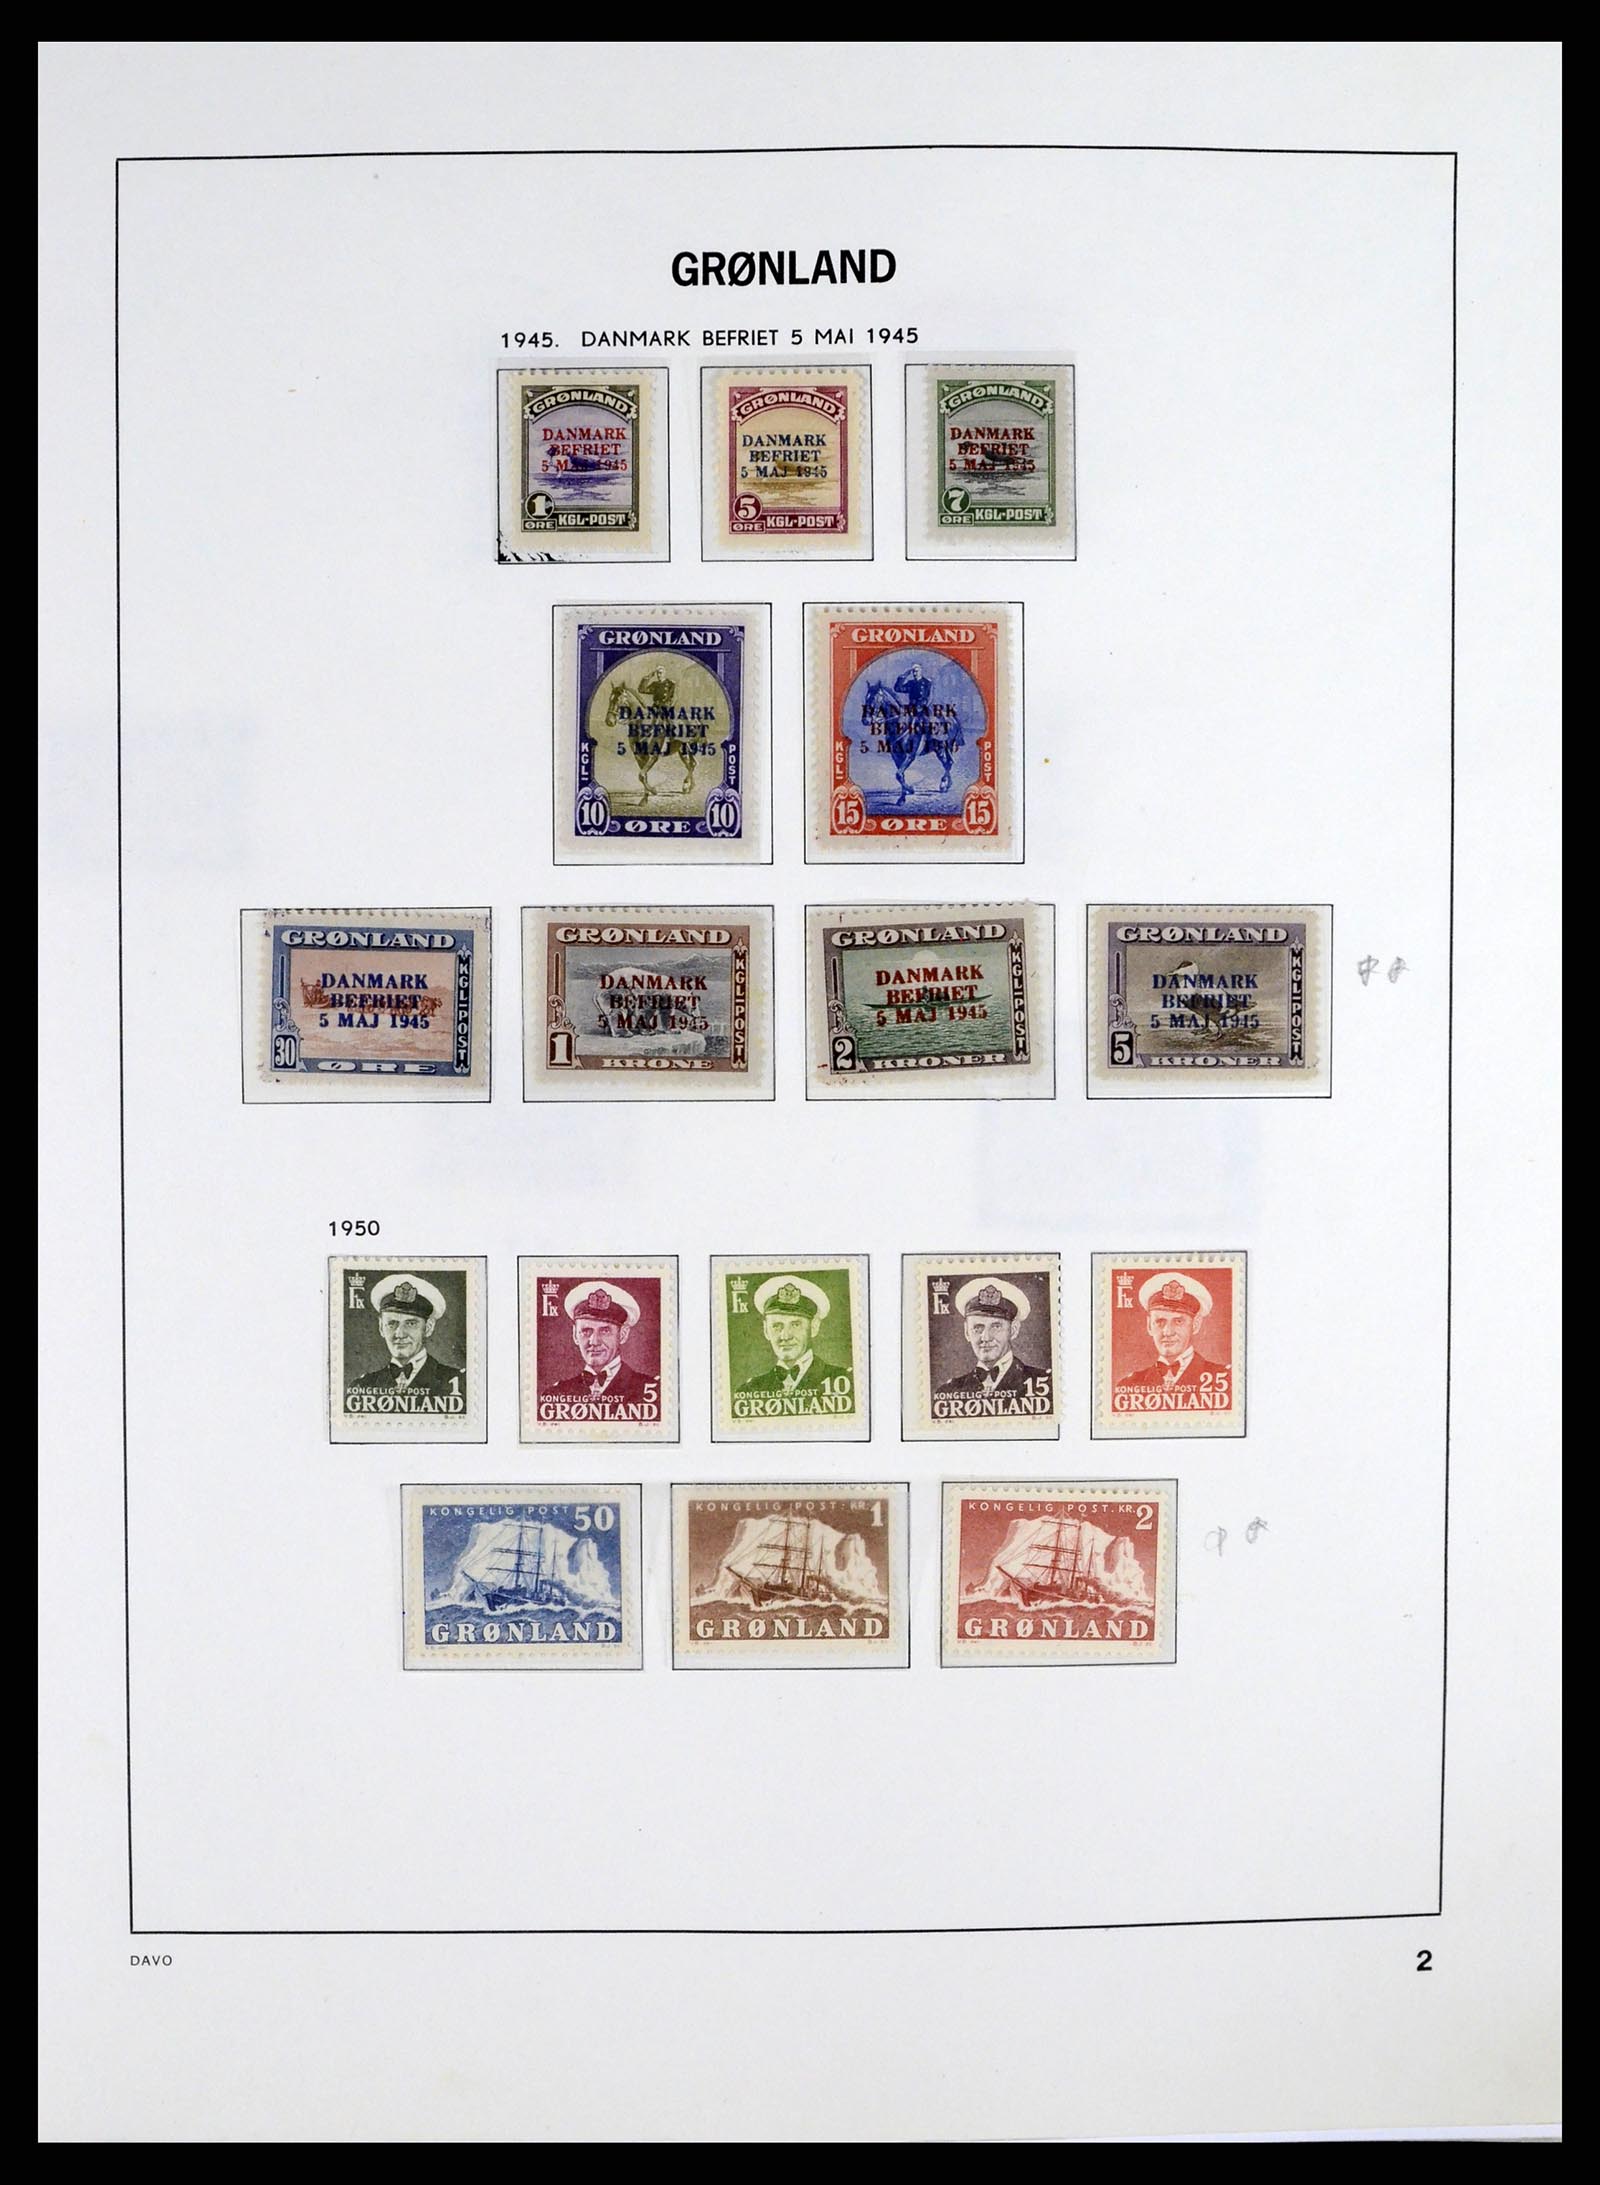 37315 003 - Stamp collection 37315 Greenland 1938-2020!